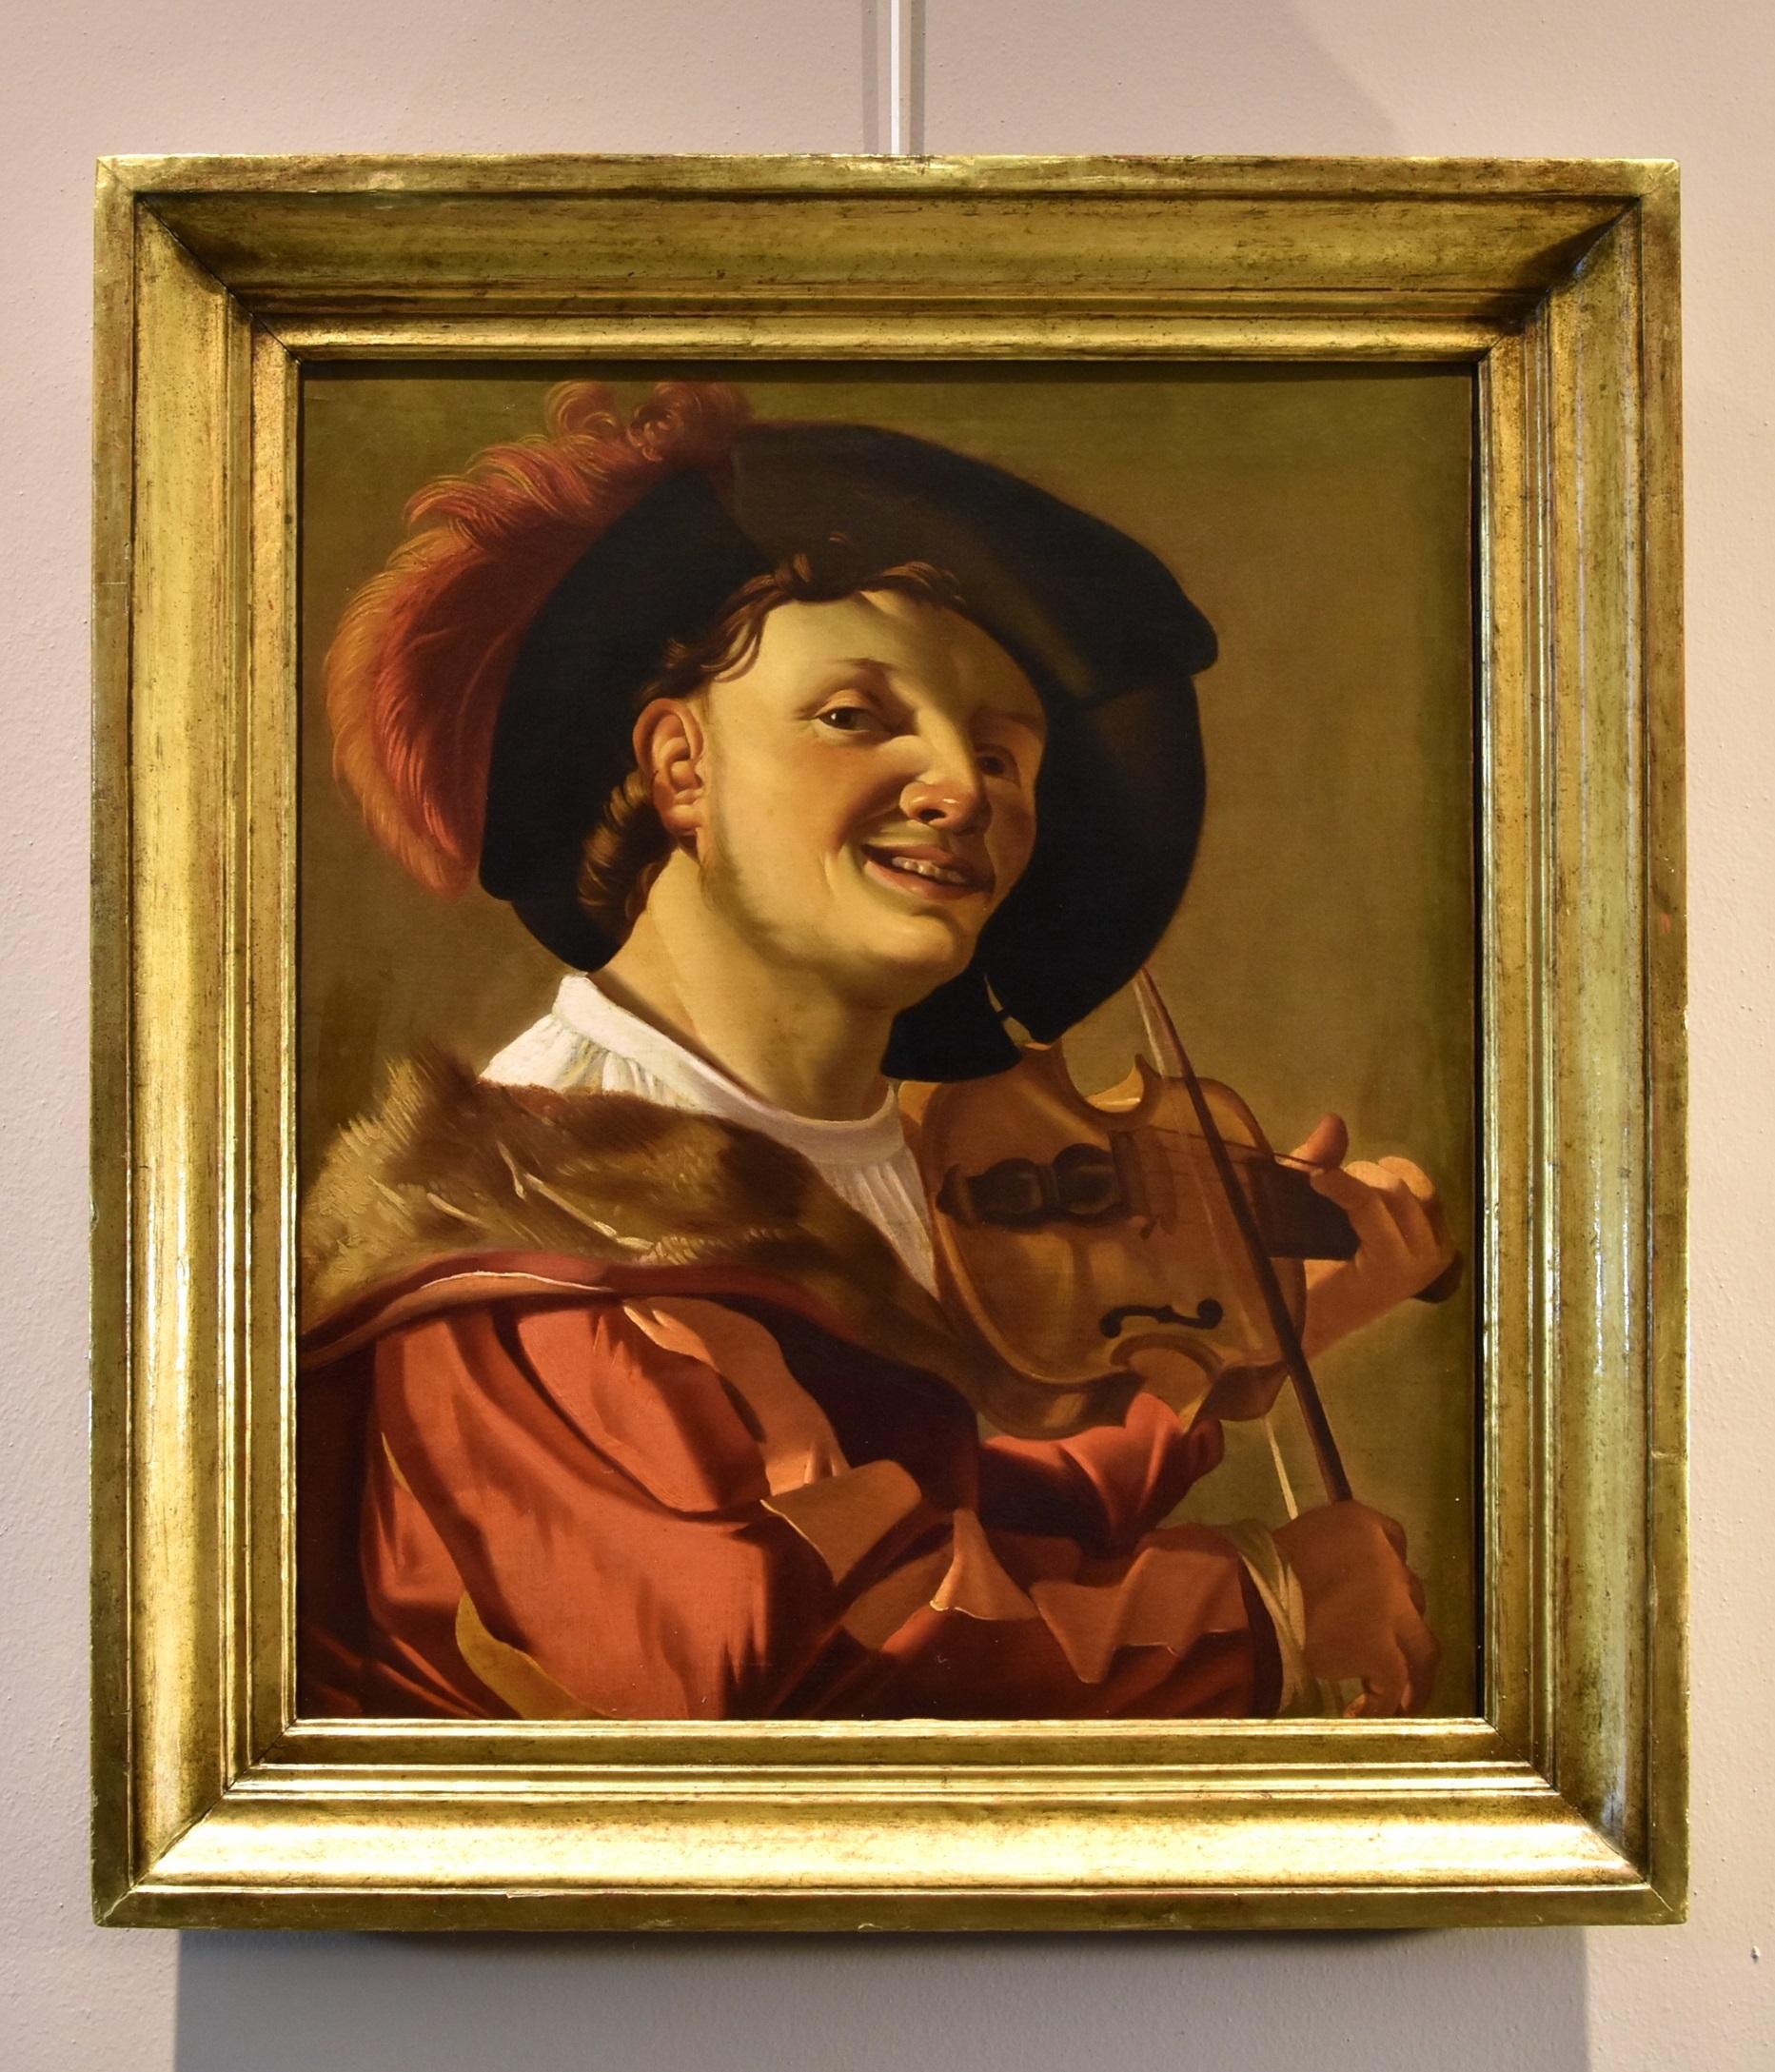 Violin Player Ter Brugghen Paint Oil on canvas 17th Century flemish Old master - Old Masters Painting by Hendrick Ter Brugghen (the Hague 1588-1629 Utrecht) 